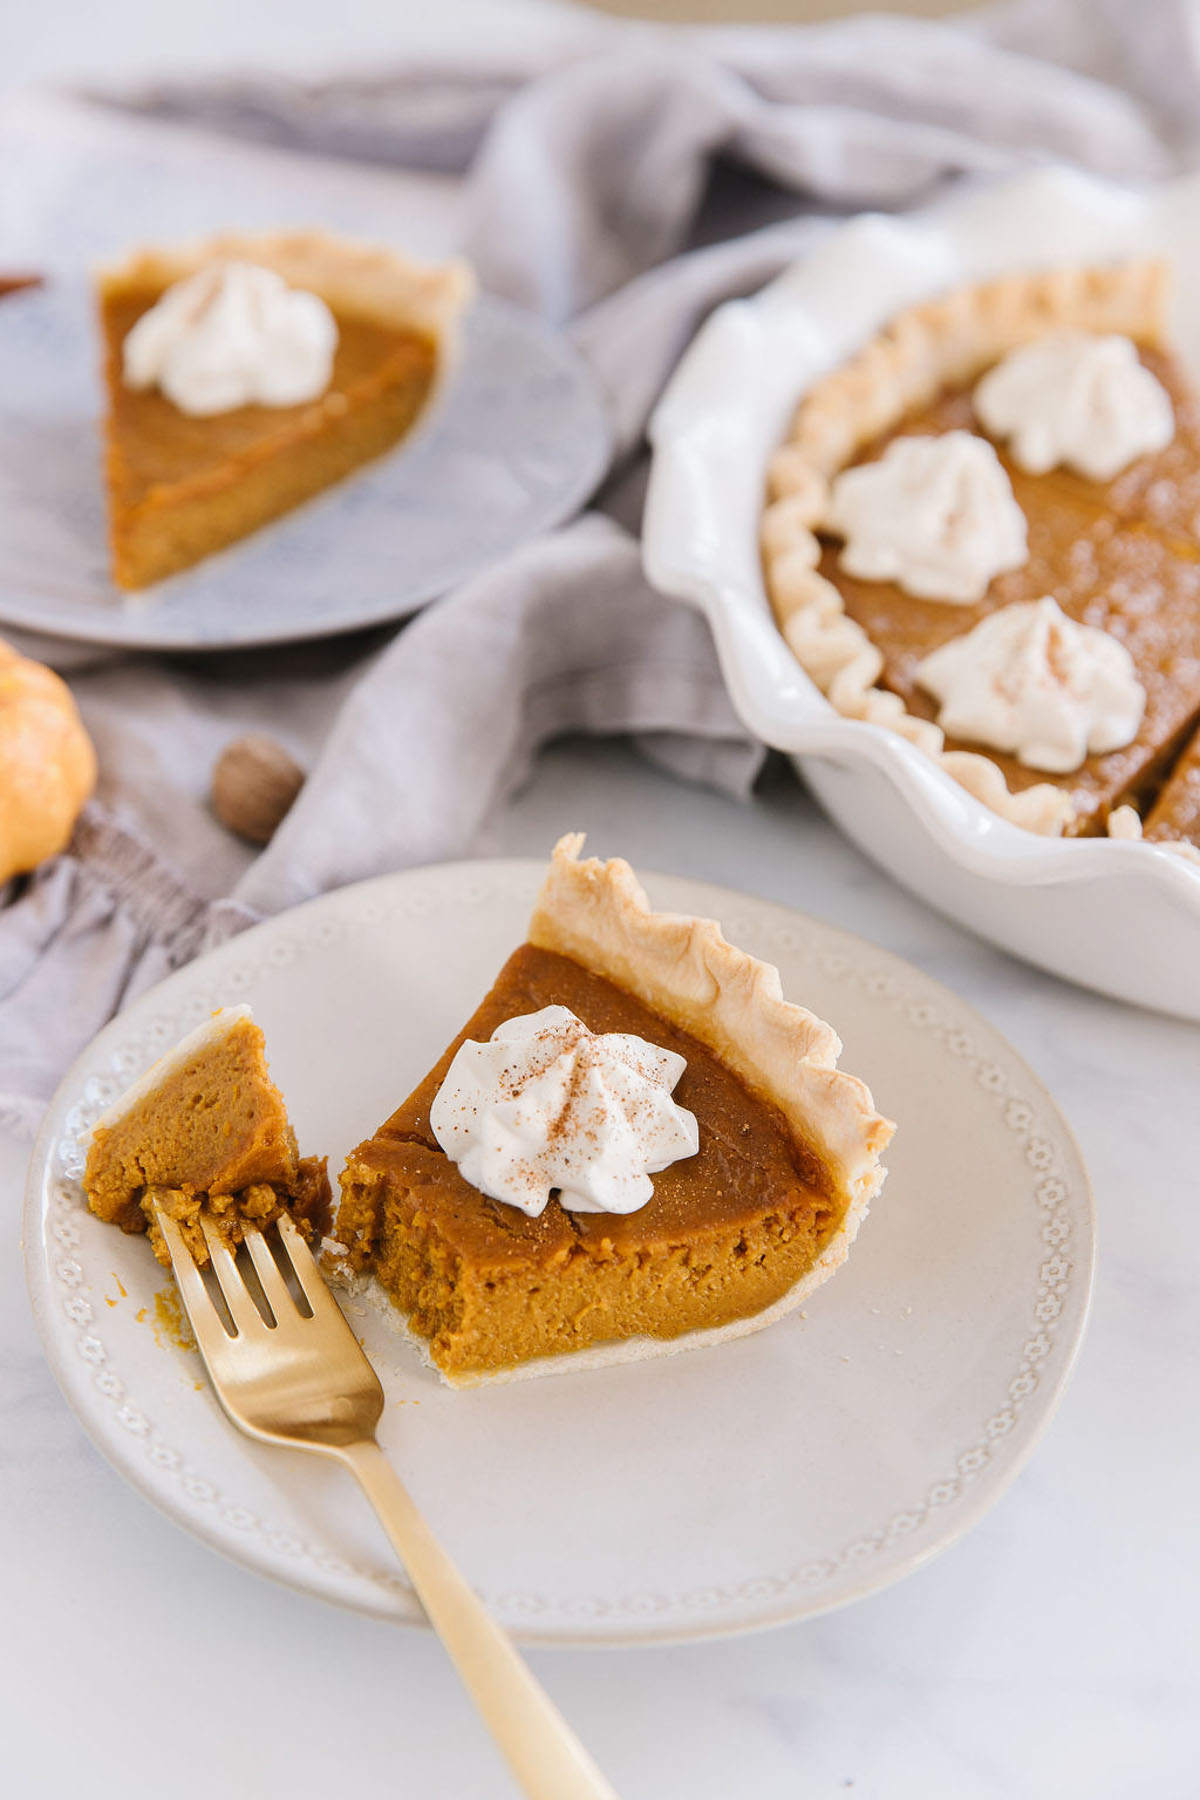 A white plate with fresh pumpkin pie slice with piece of it on a gold fork. Behind is a blue plate holding another pumpkin pie slice and a white pan of other pumpkin pie slices.